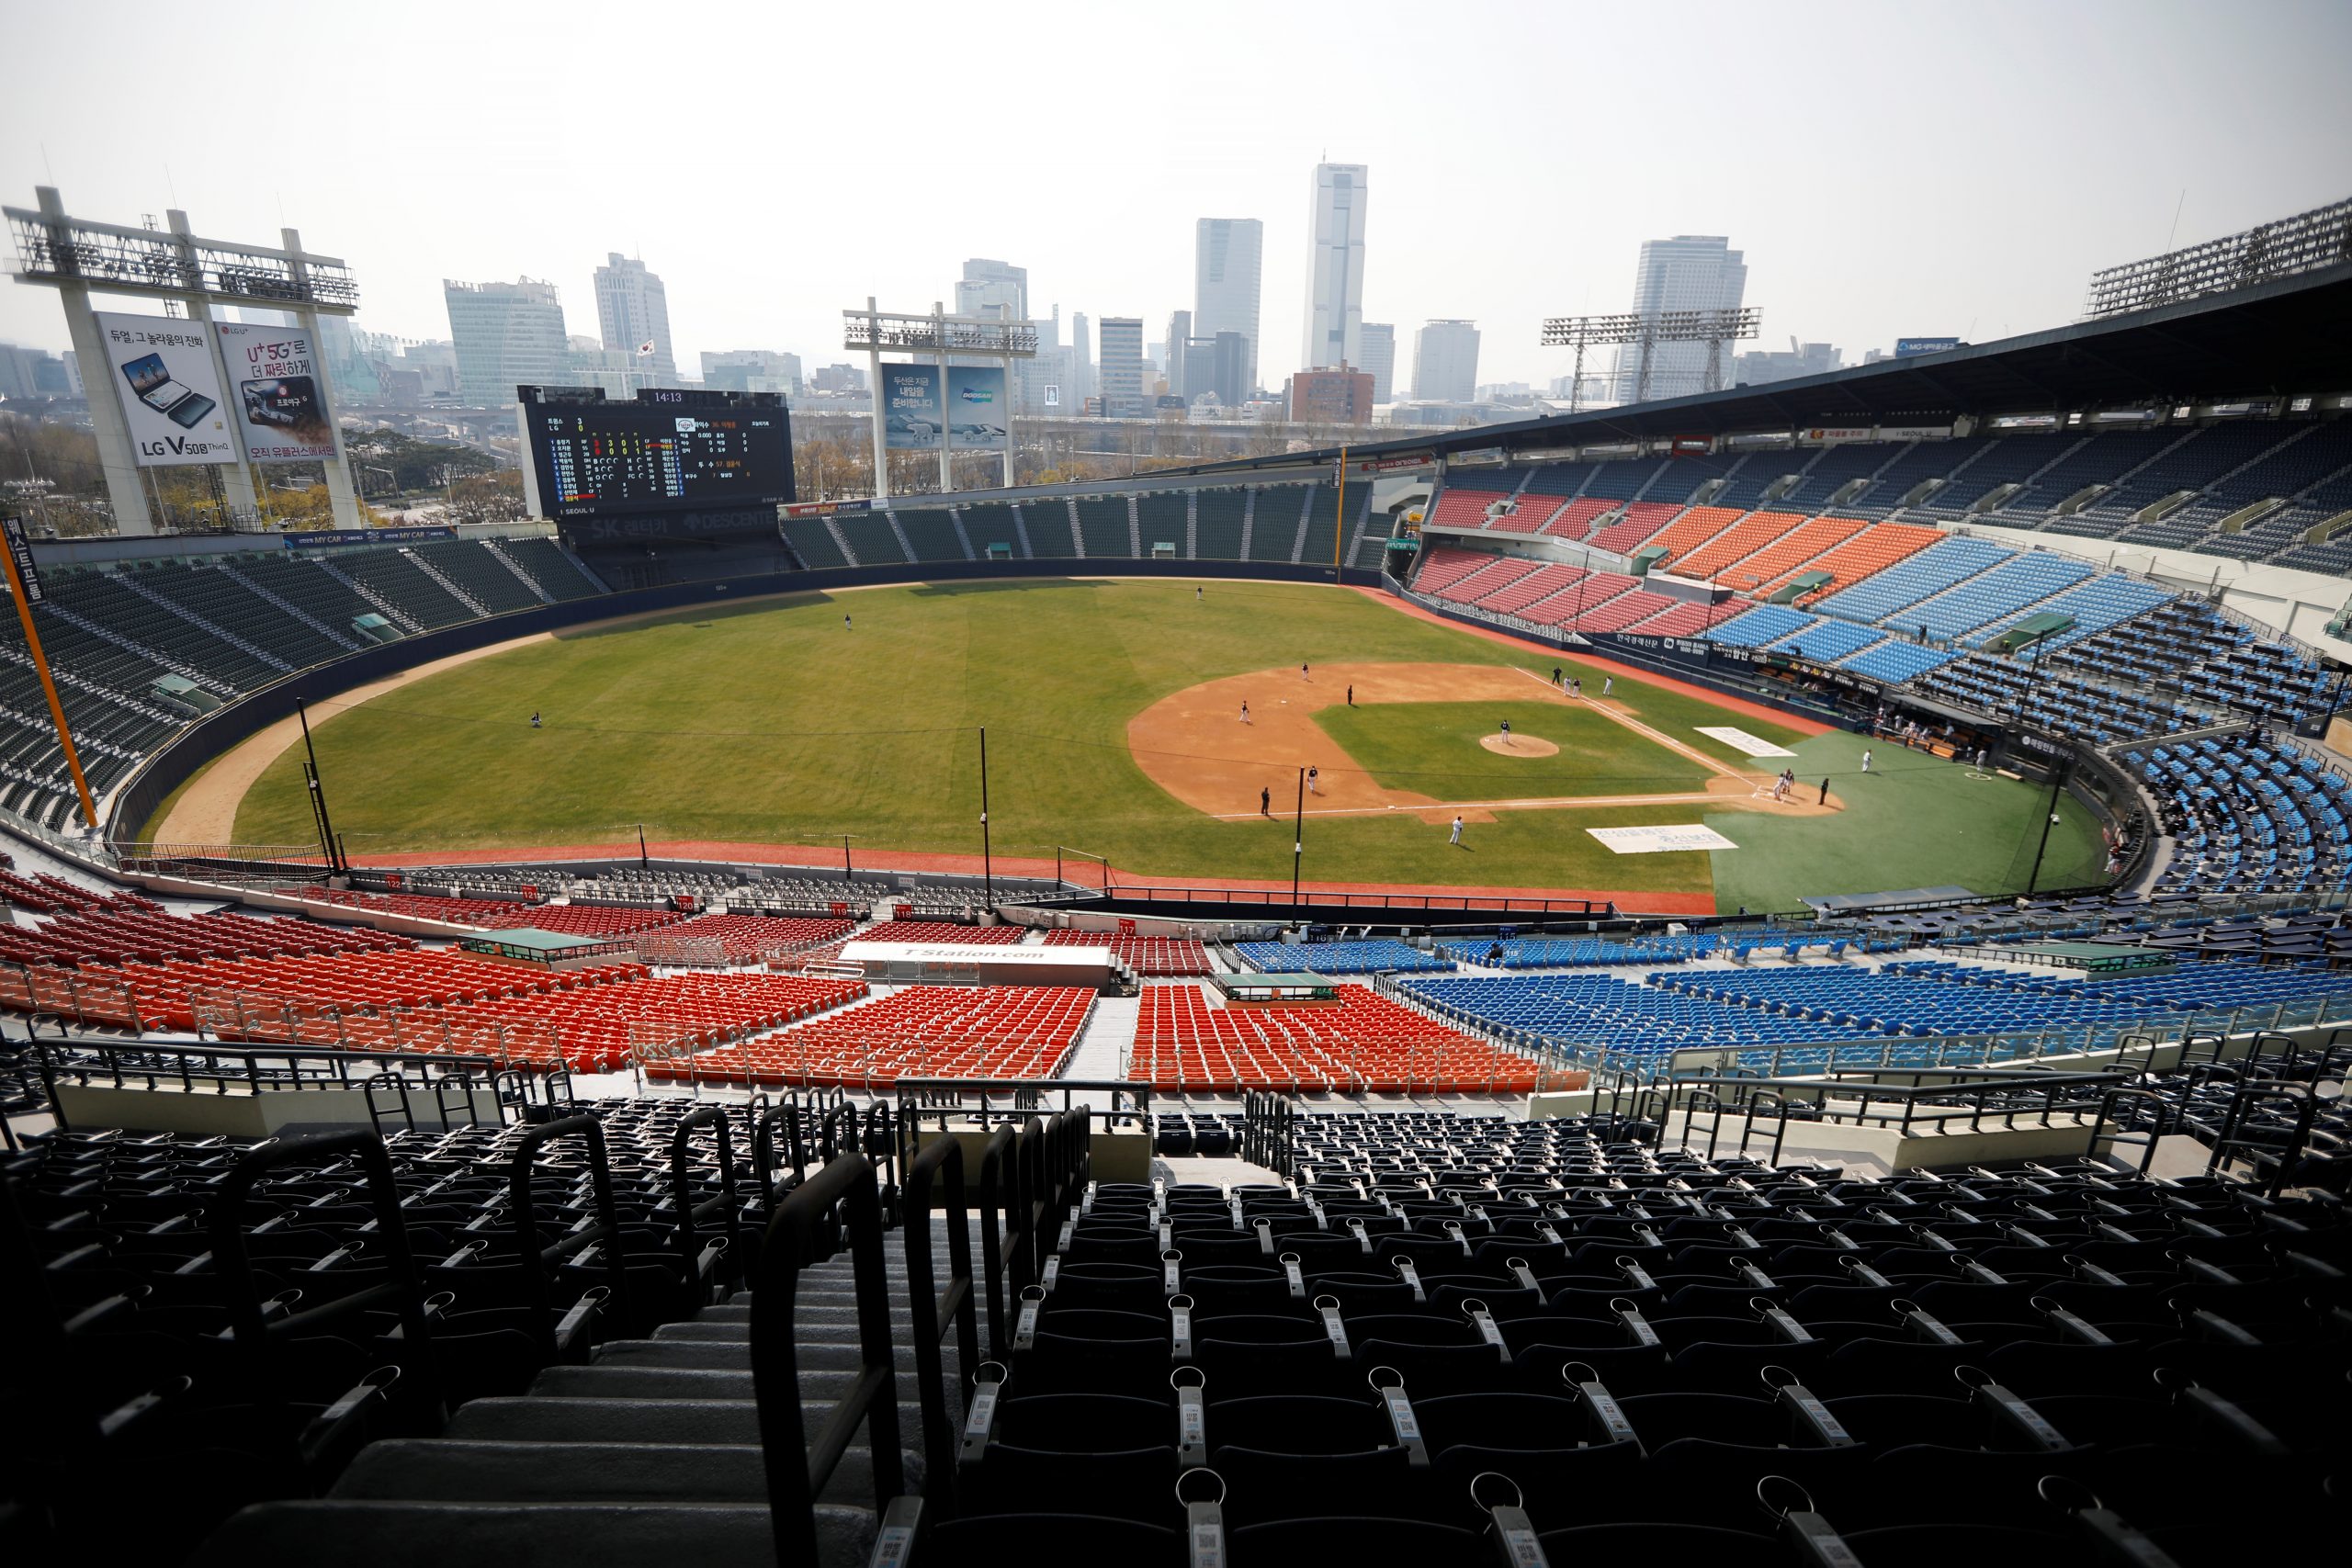 How to bet Korean Baseball: Everything you need to know about the KBO